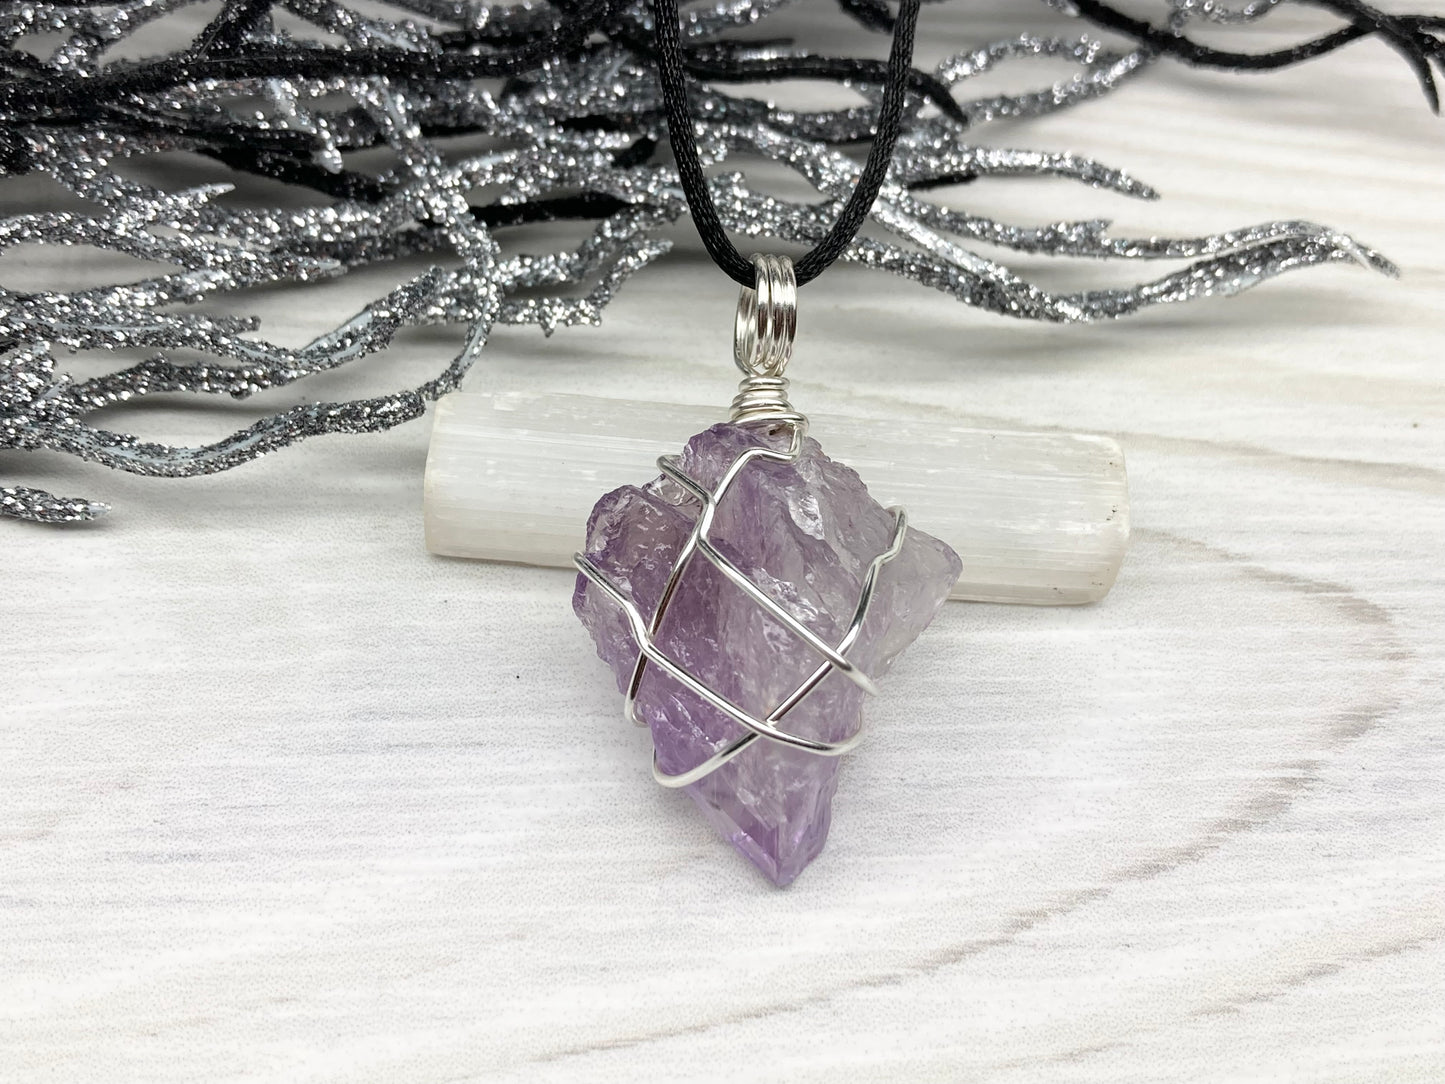 Raw Amethyst Necklace. Natural Amethyst Crystal Wrapped With Tarnish Resistant Silver Colored Copper Wire. Pendant Hangs On A Black Necklace. Handmade In Tennessee.